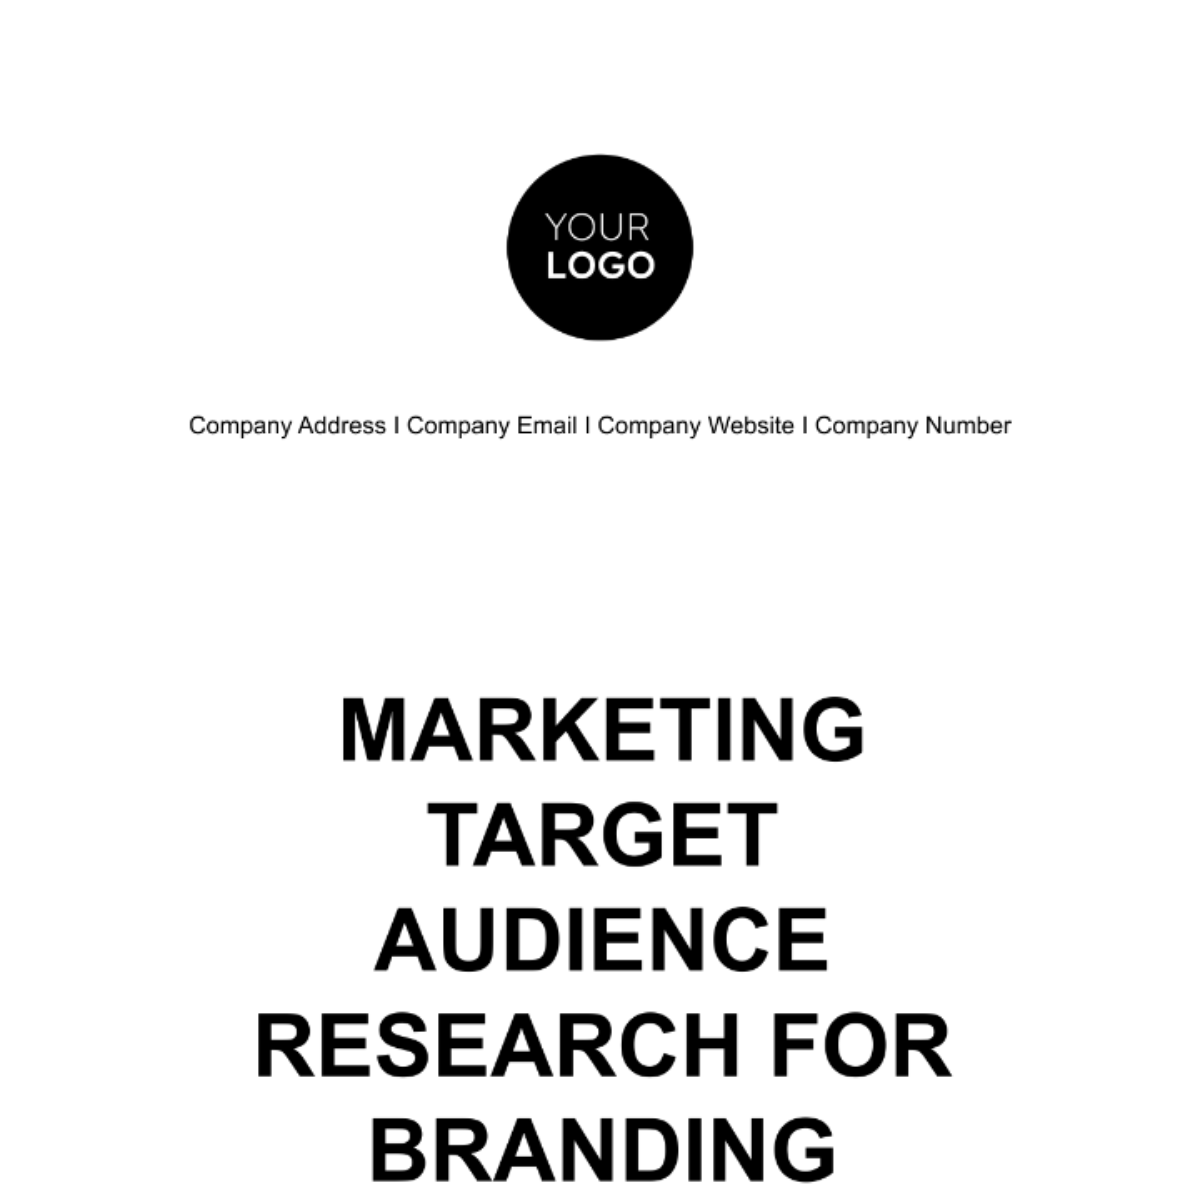 Free Marketing Target Audience Research for Branding Template